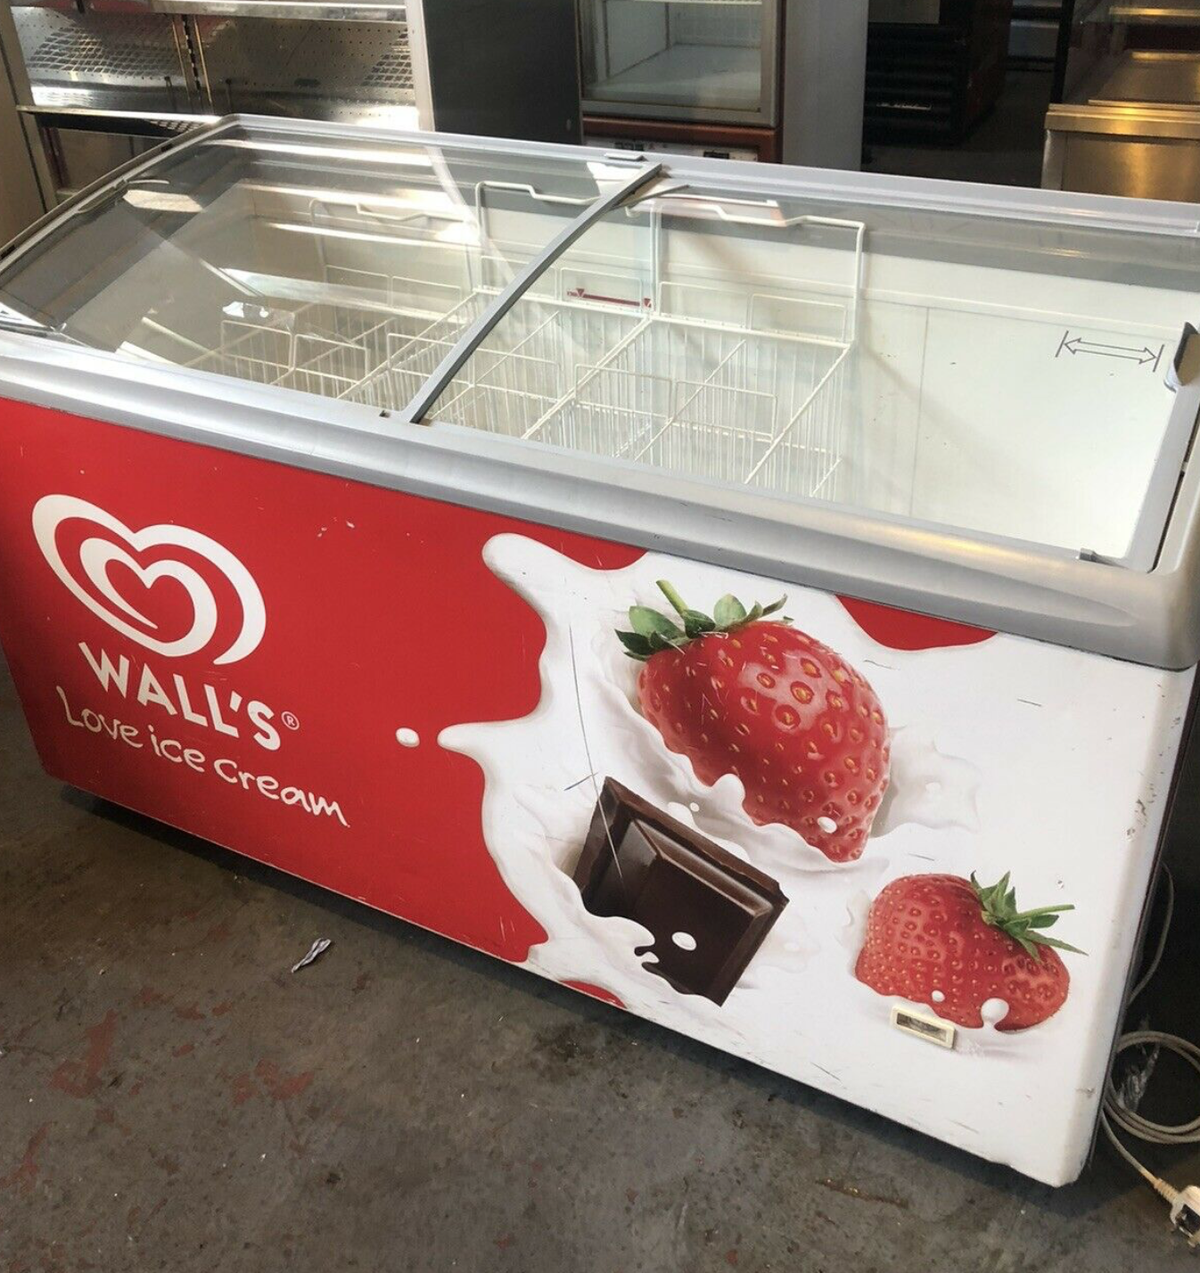 https://for-sale.used-secondhand.co.uk/media/used/secondhand/images/64797/walls-branded-15m-sliding-lid-display-freezer-bedford-bedfordshire/1200/ice-cream-display-for-sale-705.png